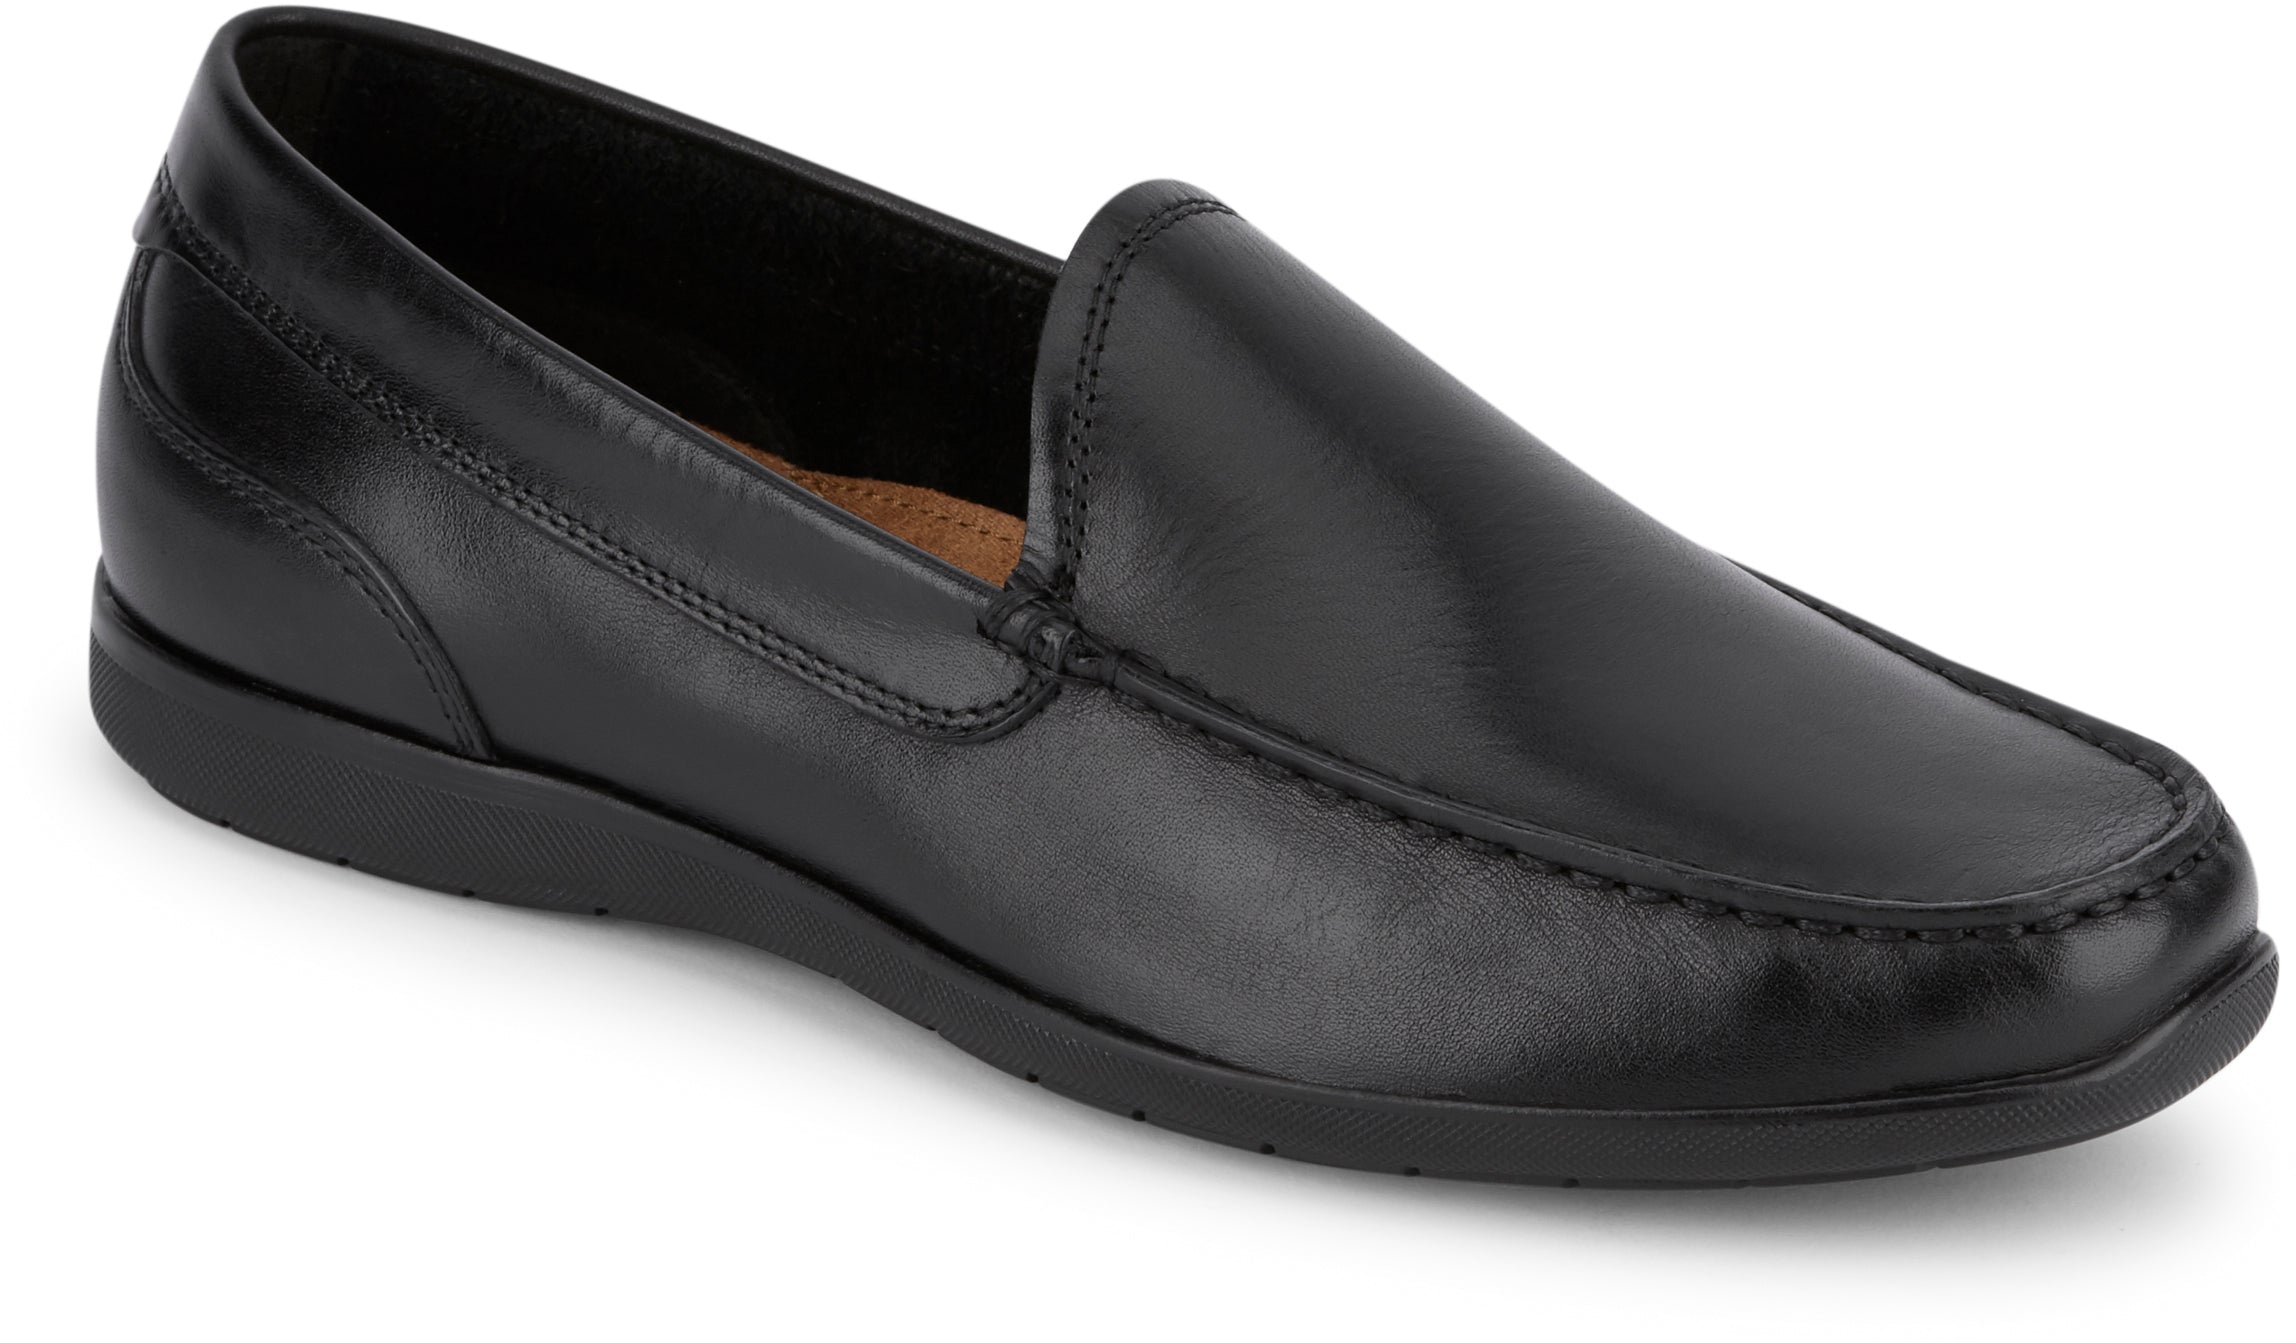 Dockers Men's Lindon Loafer in Blackcolor from the side view